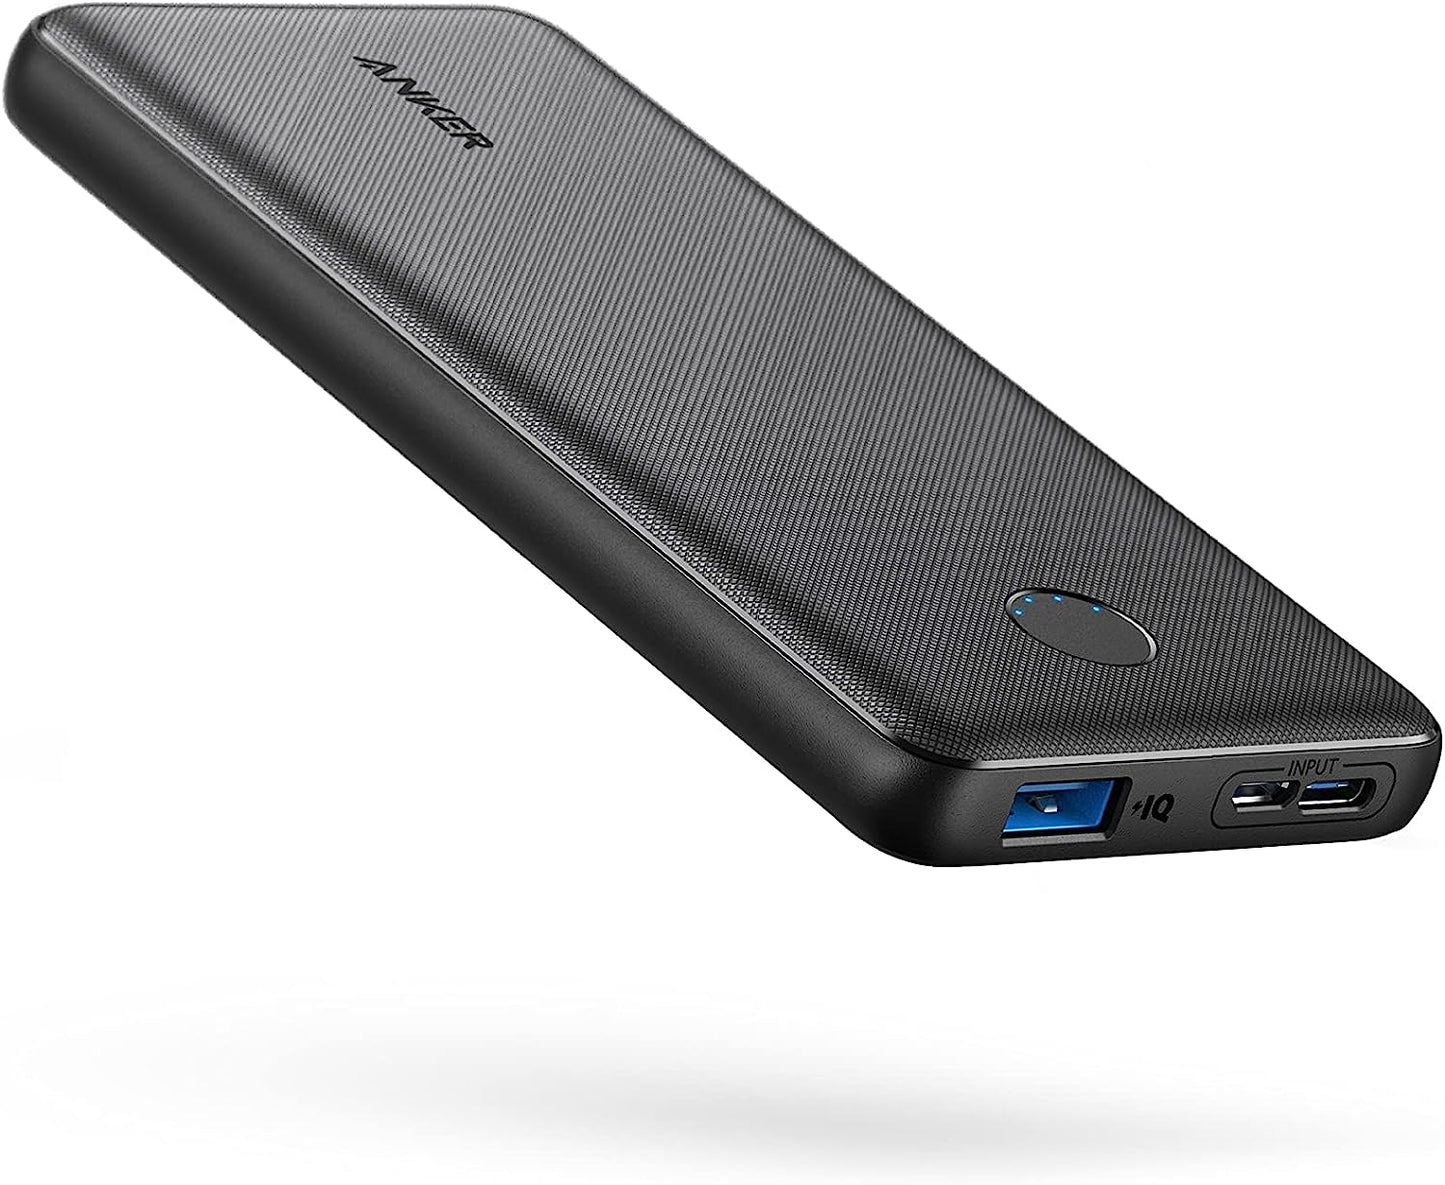 Anker Power Bank, 10,000 mAh portable charger with PowerlQ Charging Technology USB-C